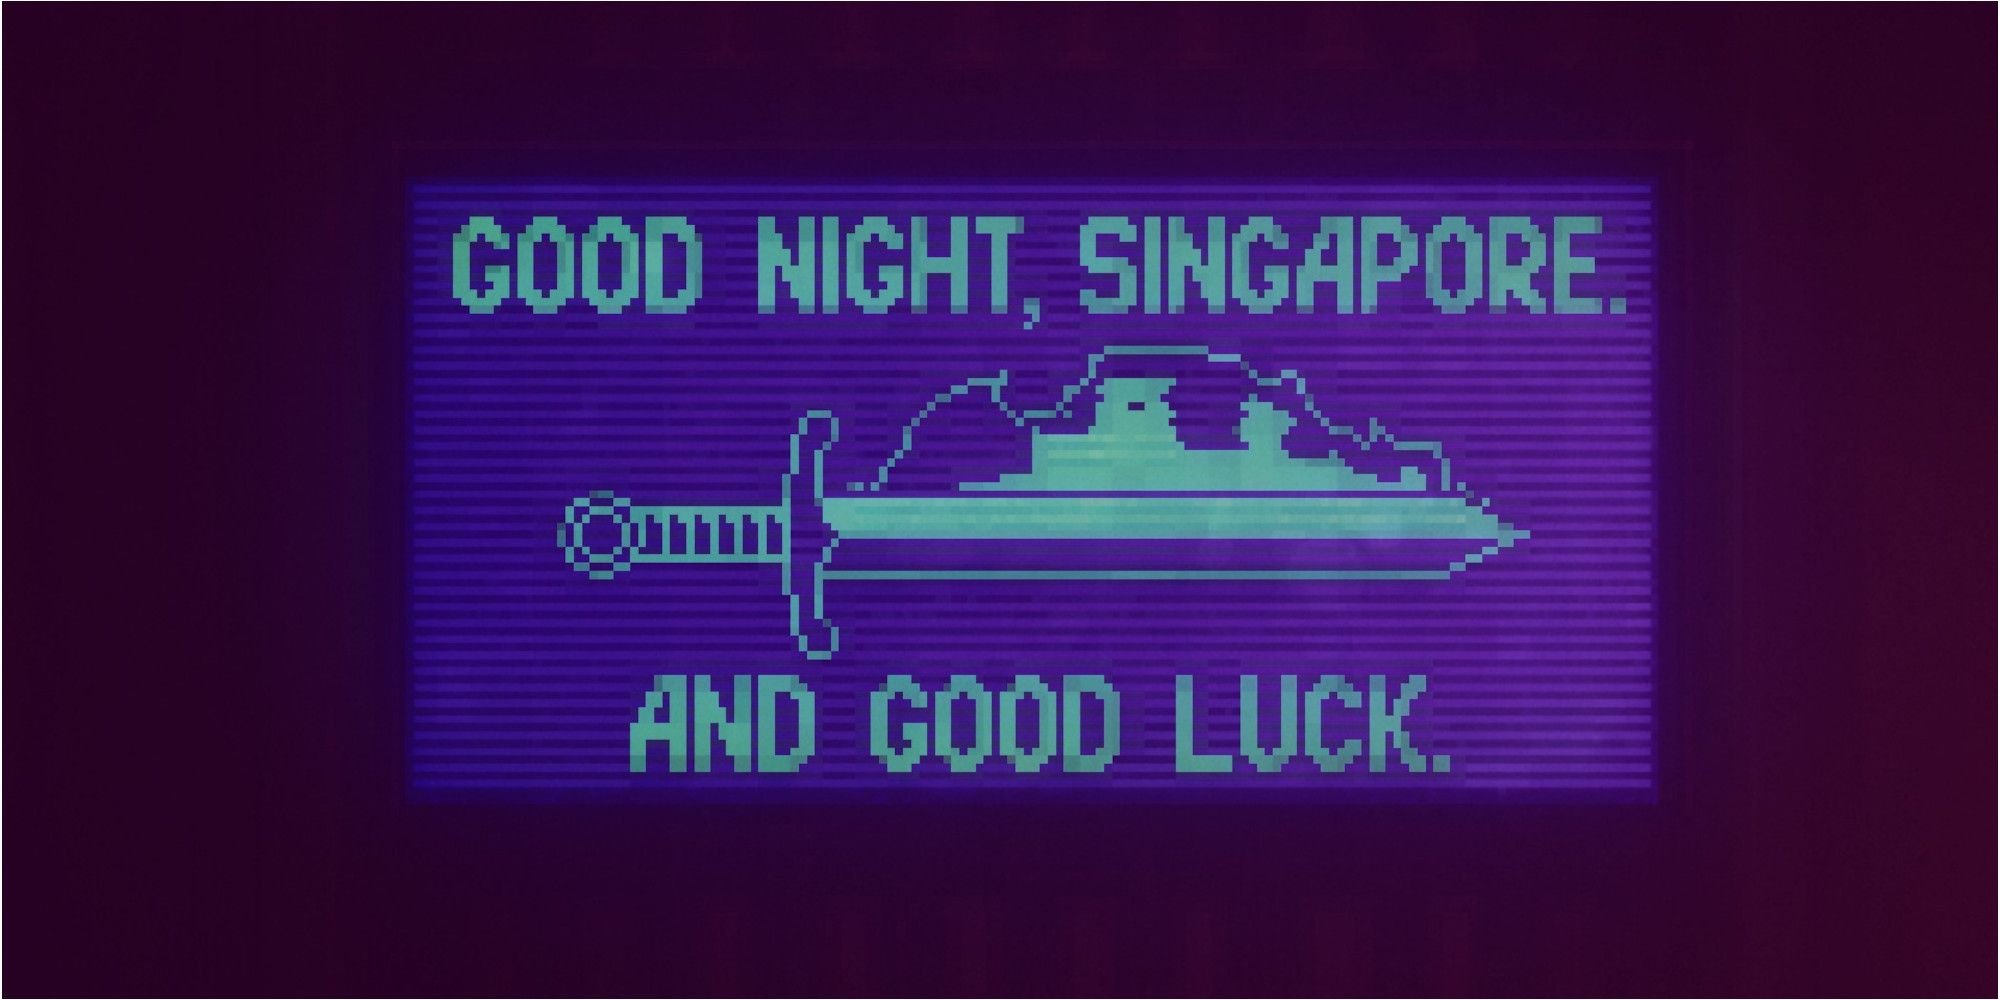 Chinatown Detective Agency Hacked Sign that reads "Good night, Singapore, and good luck" with a picture of a flaming sword